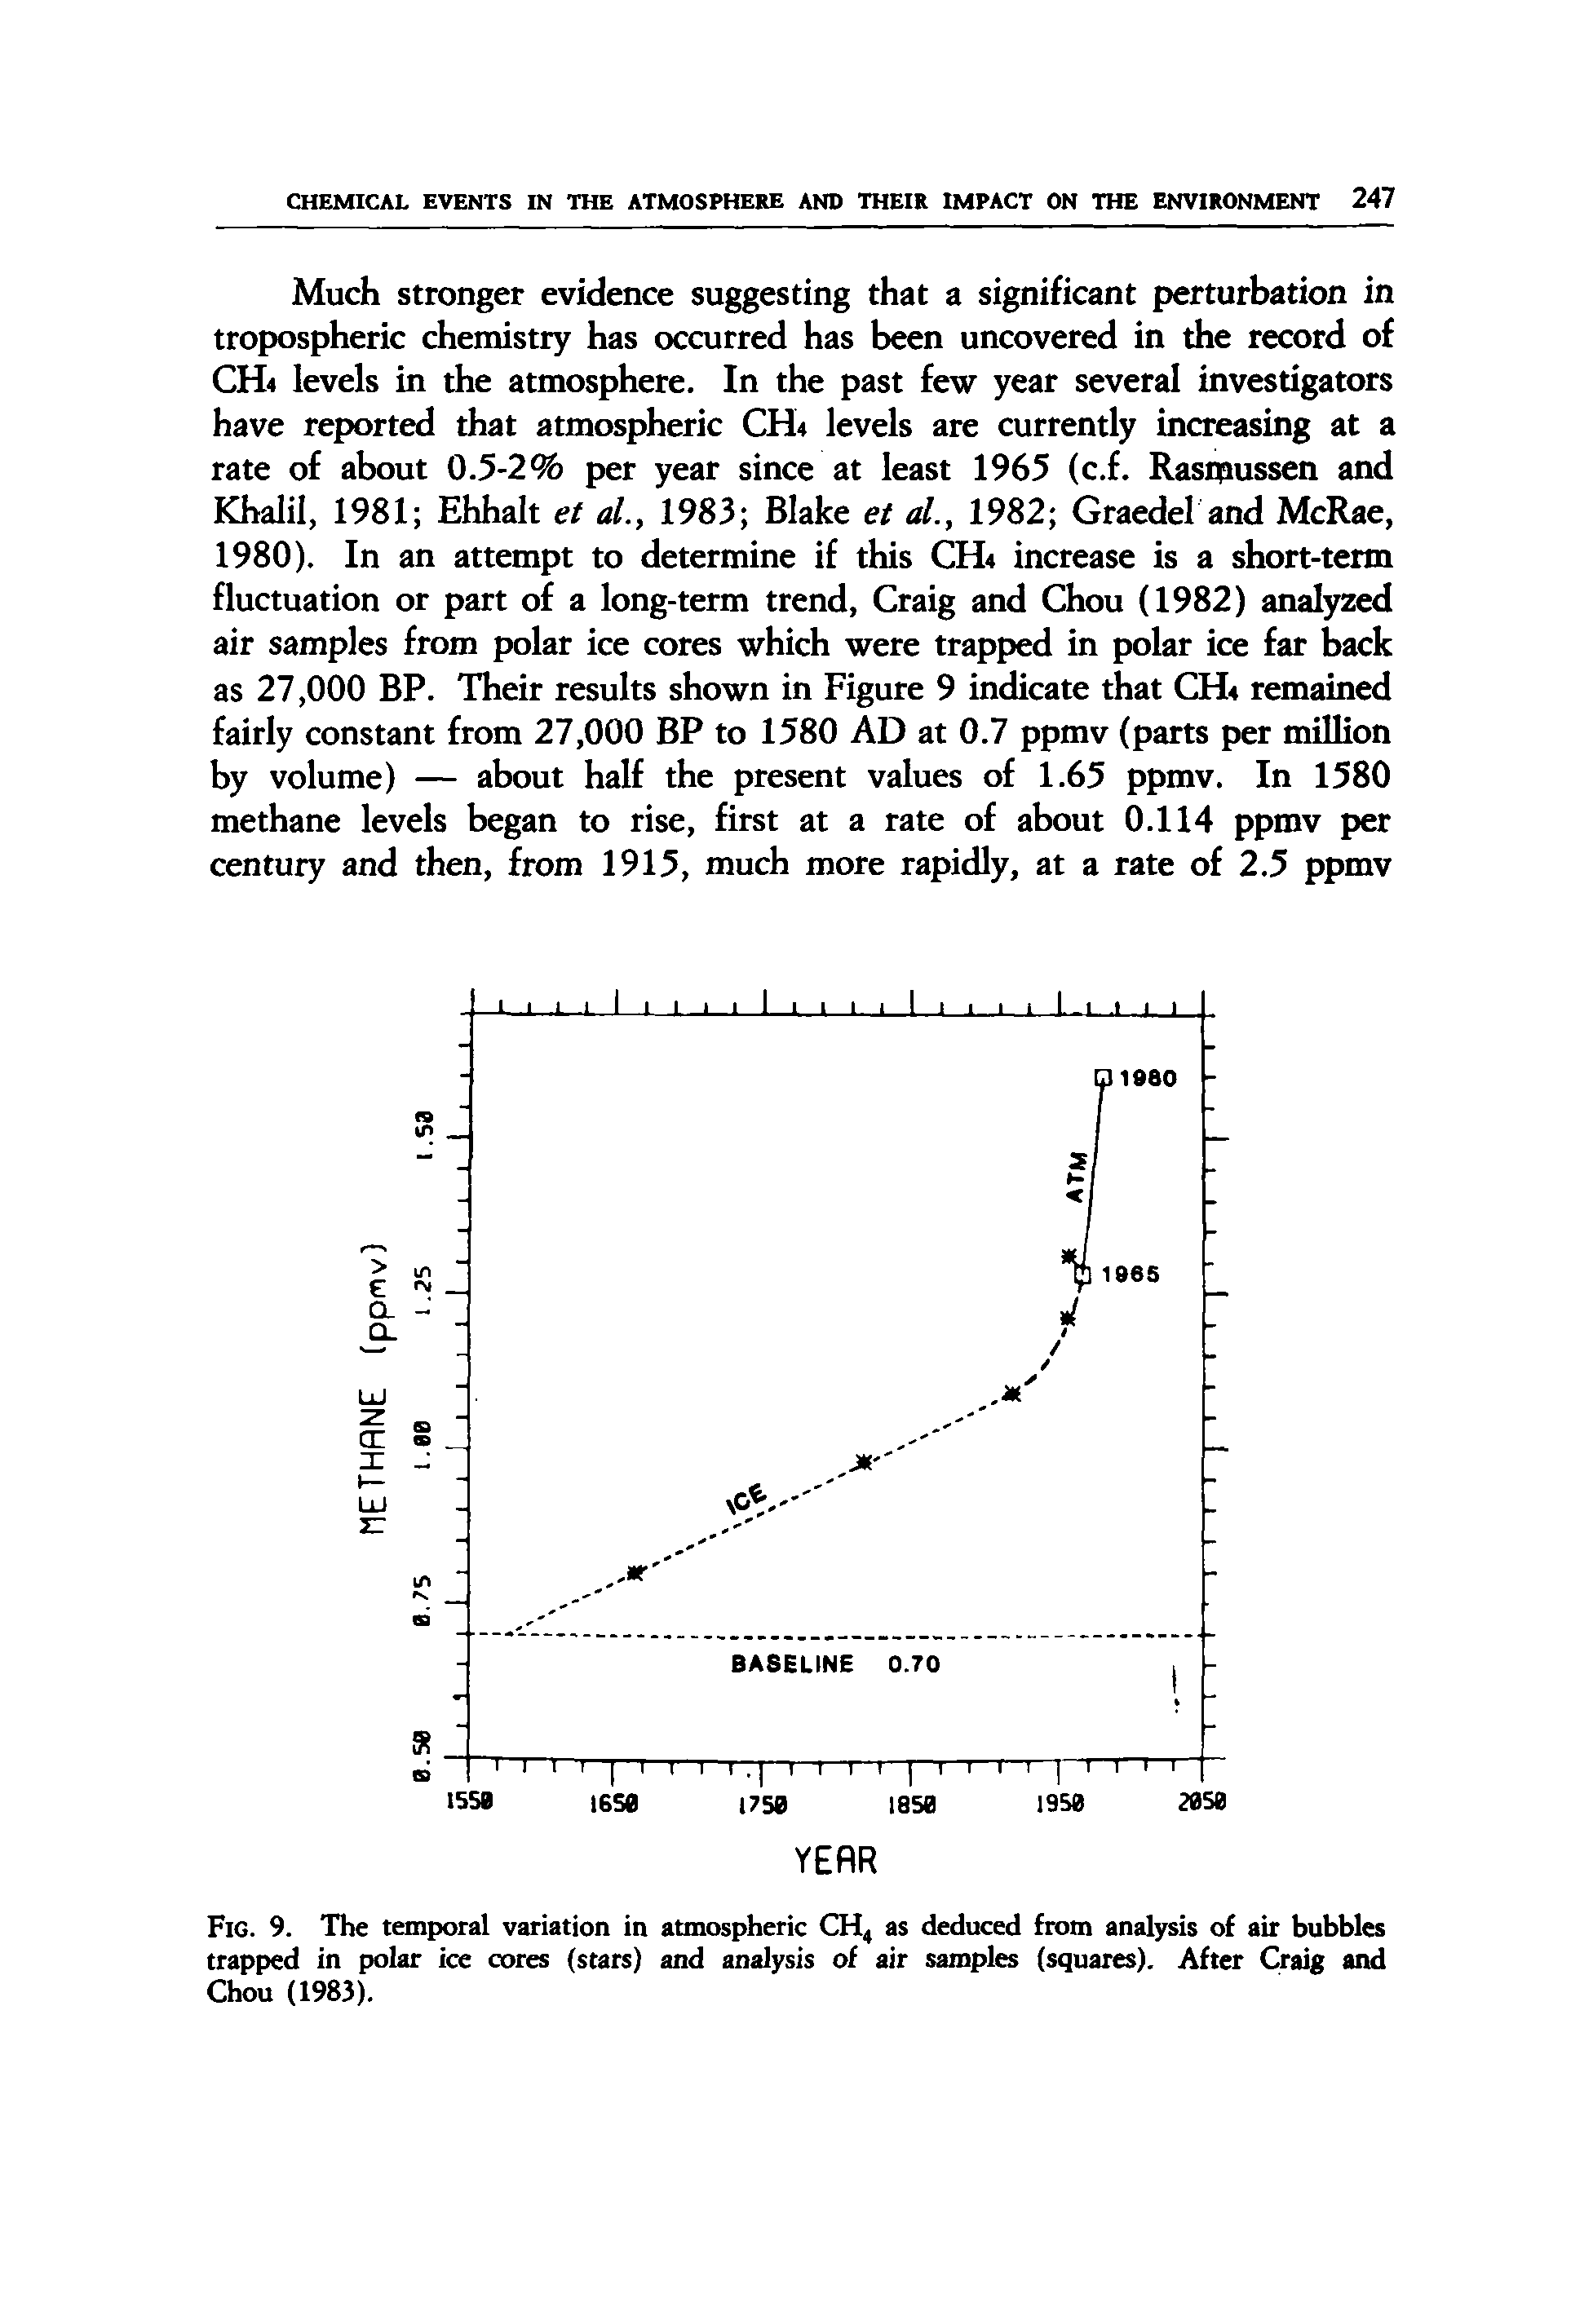 Fig. 9. The temporal variation in atmospheric CH4 as deduced from analysis of air bubbles trapped in polar ice cores (stars) and analysis of air samples (squares). After Craig and Chou (1983).